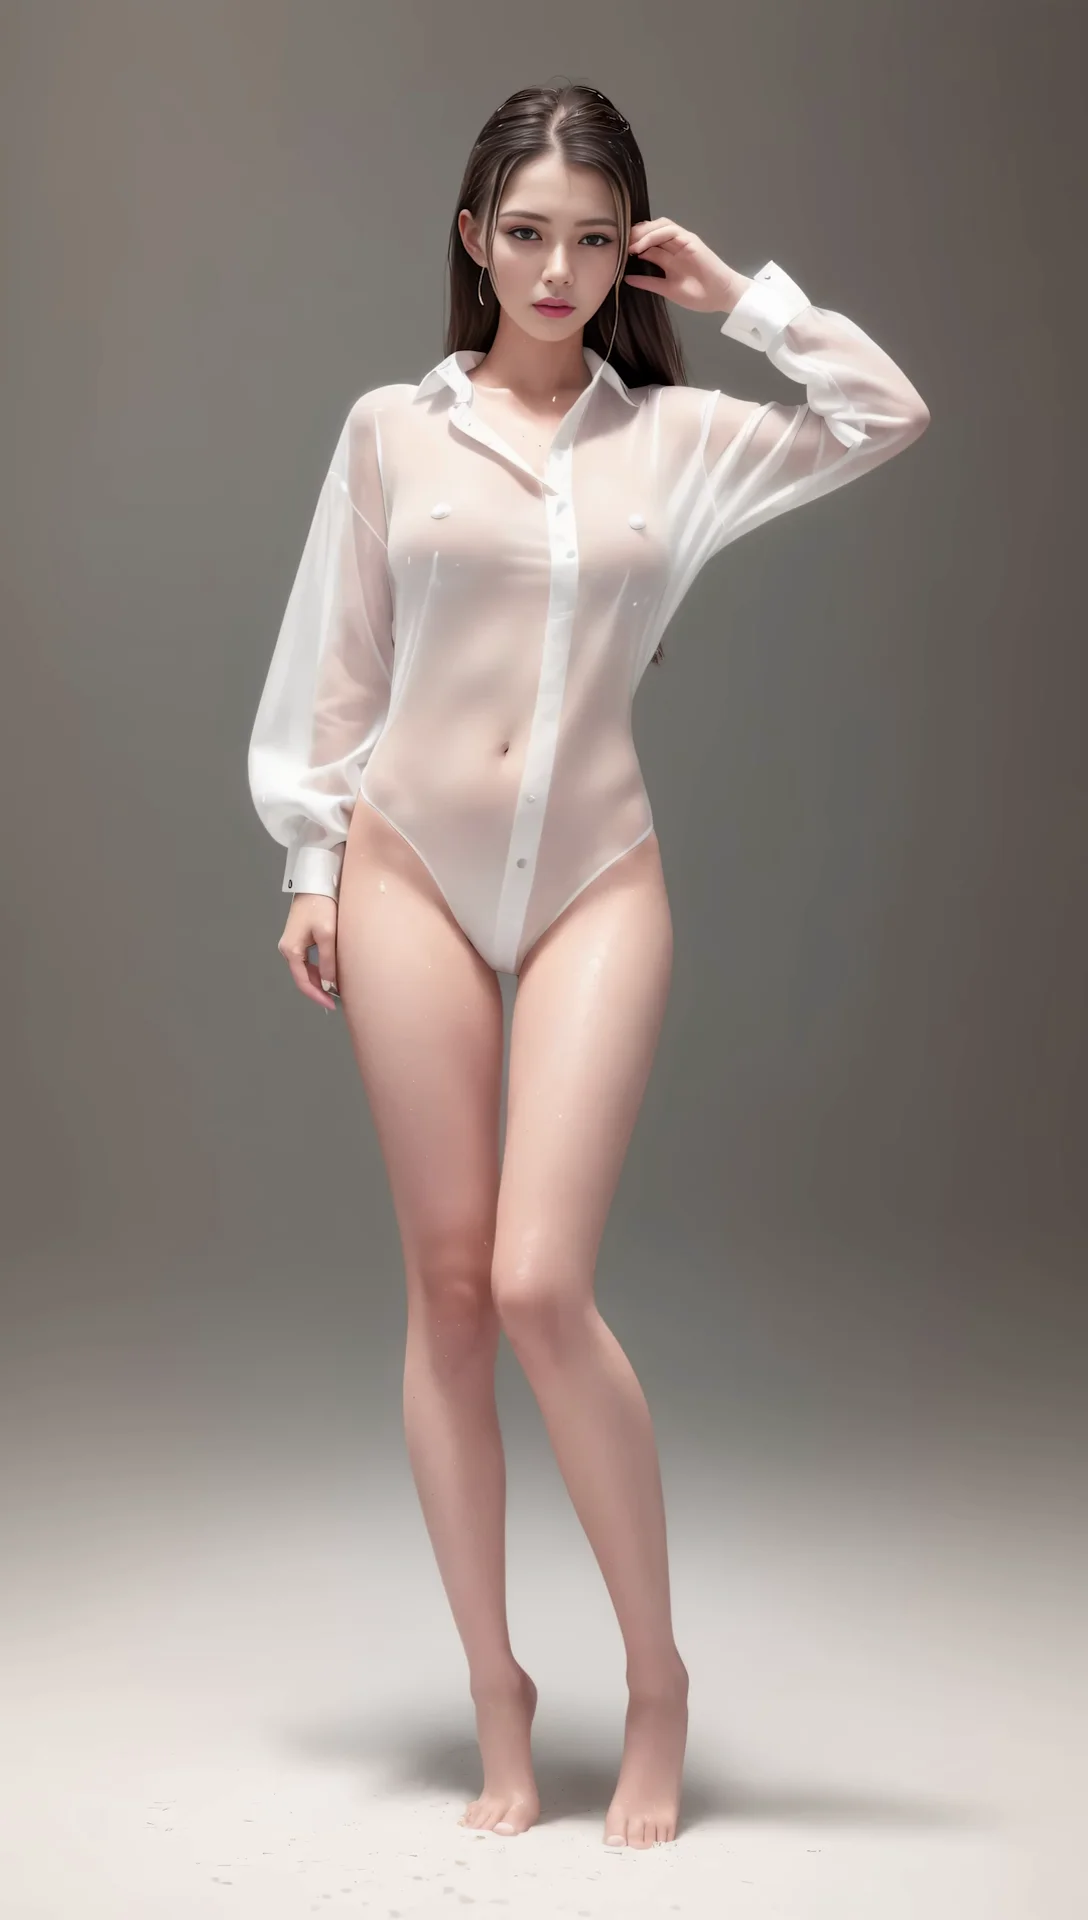 Ai Lookbook Beautiful Girl In A White Shirt And Panties Image 03